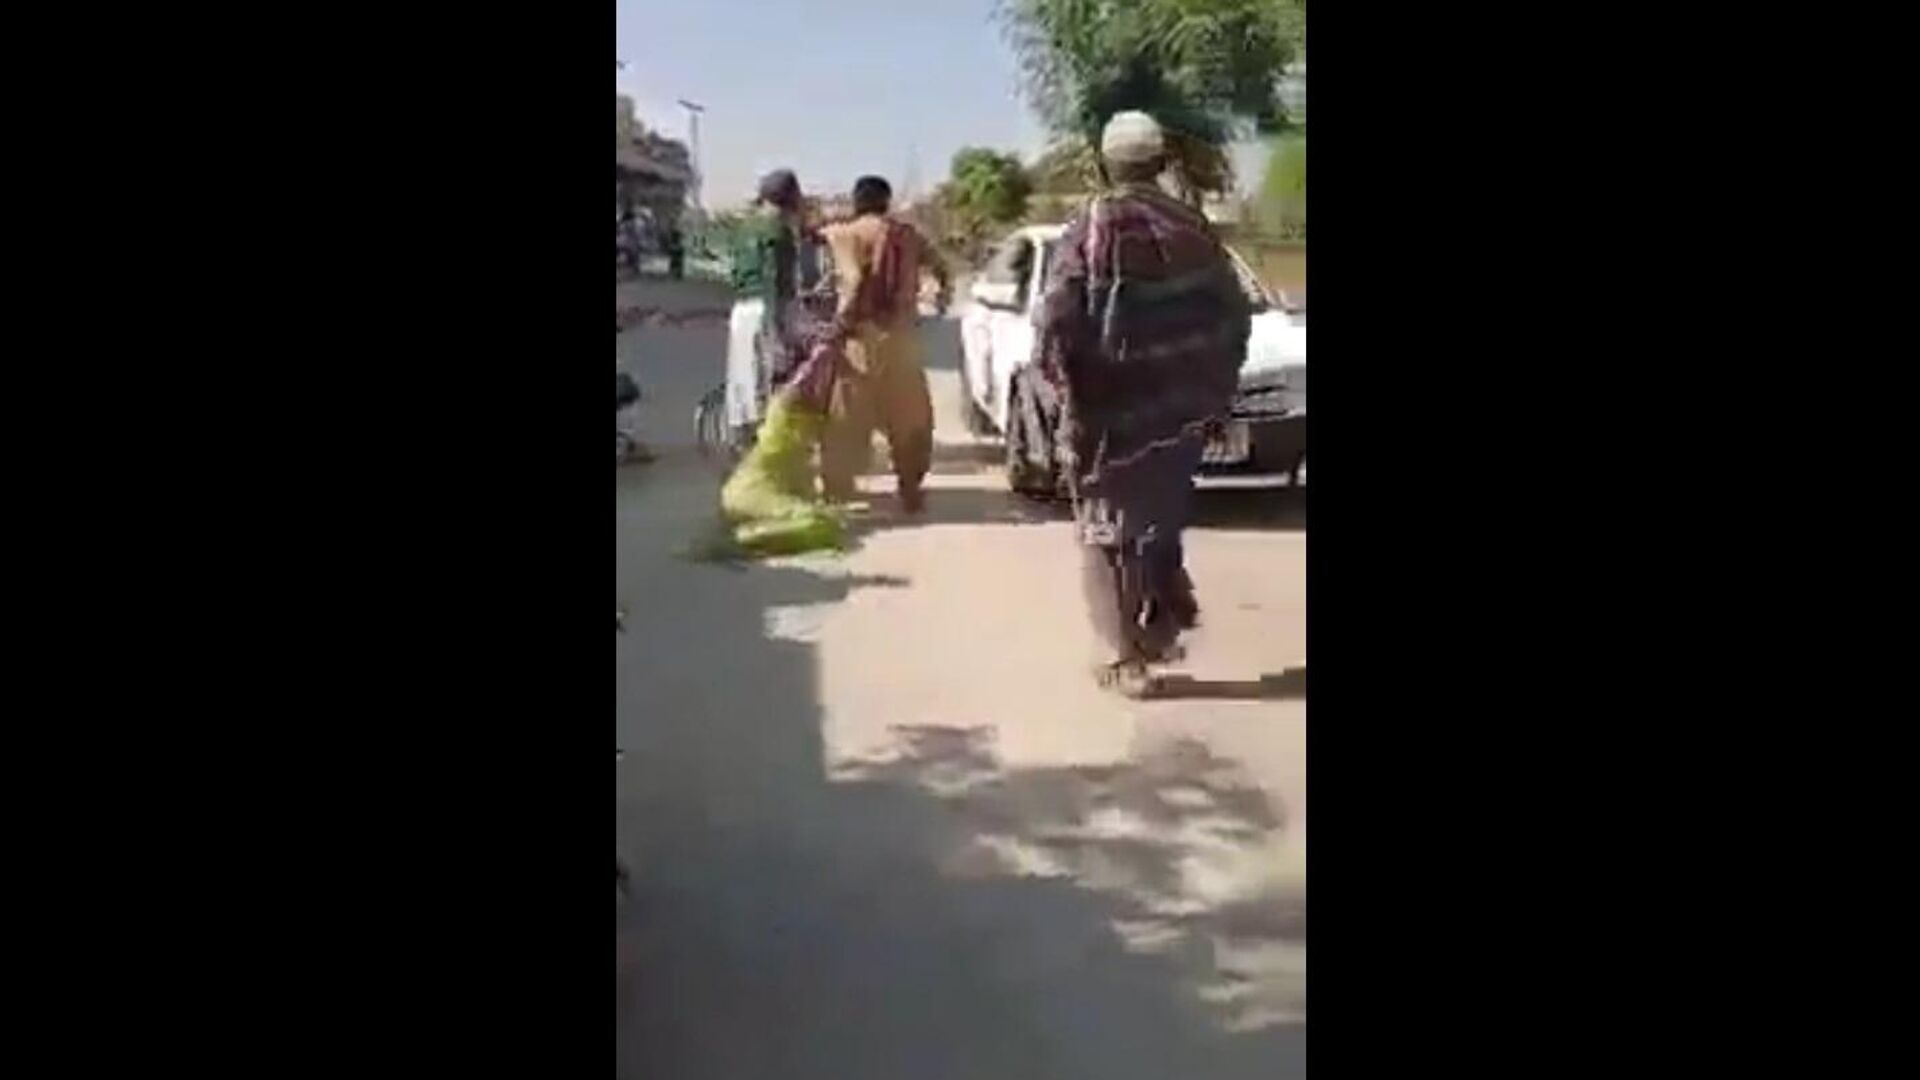 Stunned to silence!
Look how a Hindu woman is abducted in daylight, out-side session courts Umarkot,Sindh-Pakistan. She is screaming for help but they aren’t afraid of any police or action and they dragged her from hair & put her in car - Sputnik International, 1920, 22.12.2021